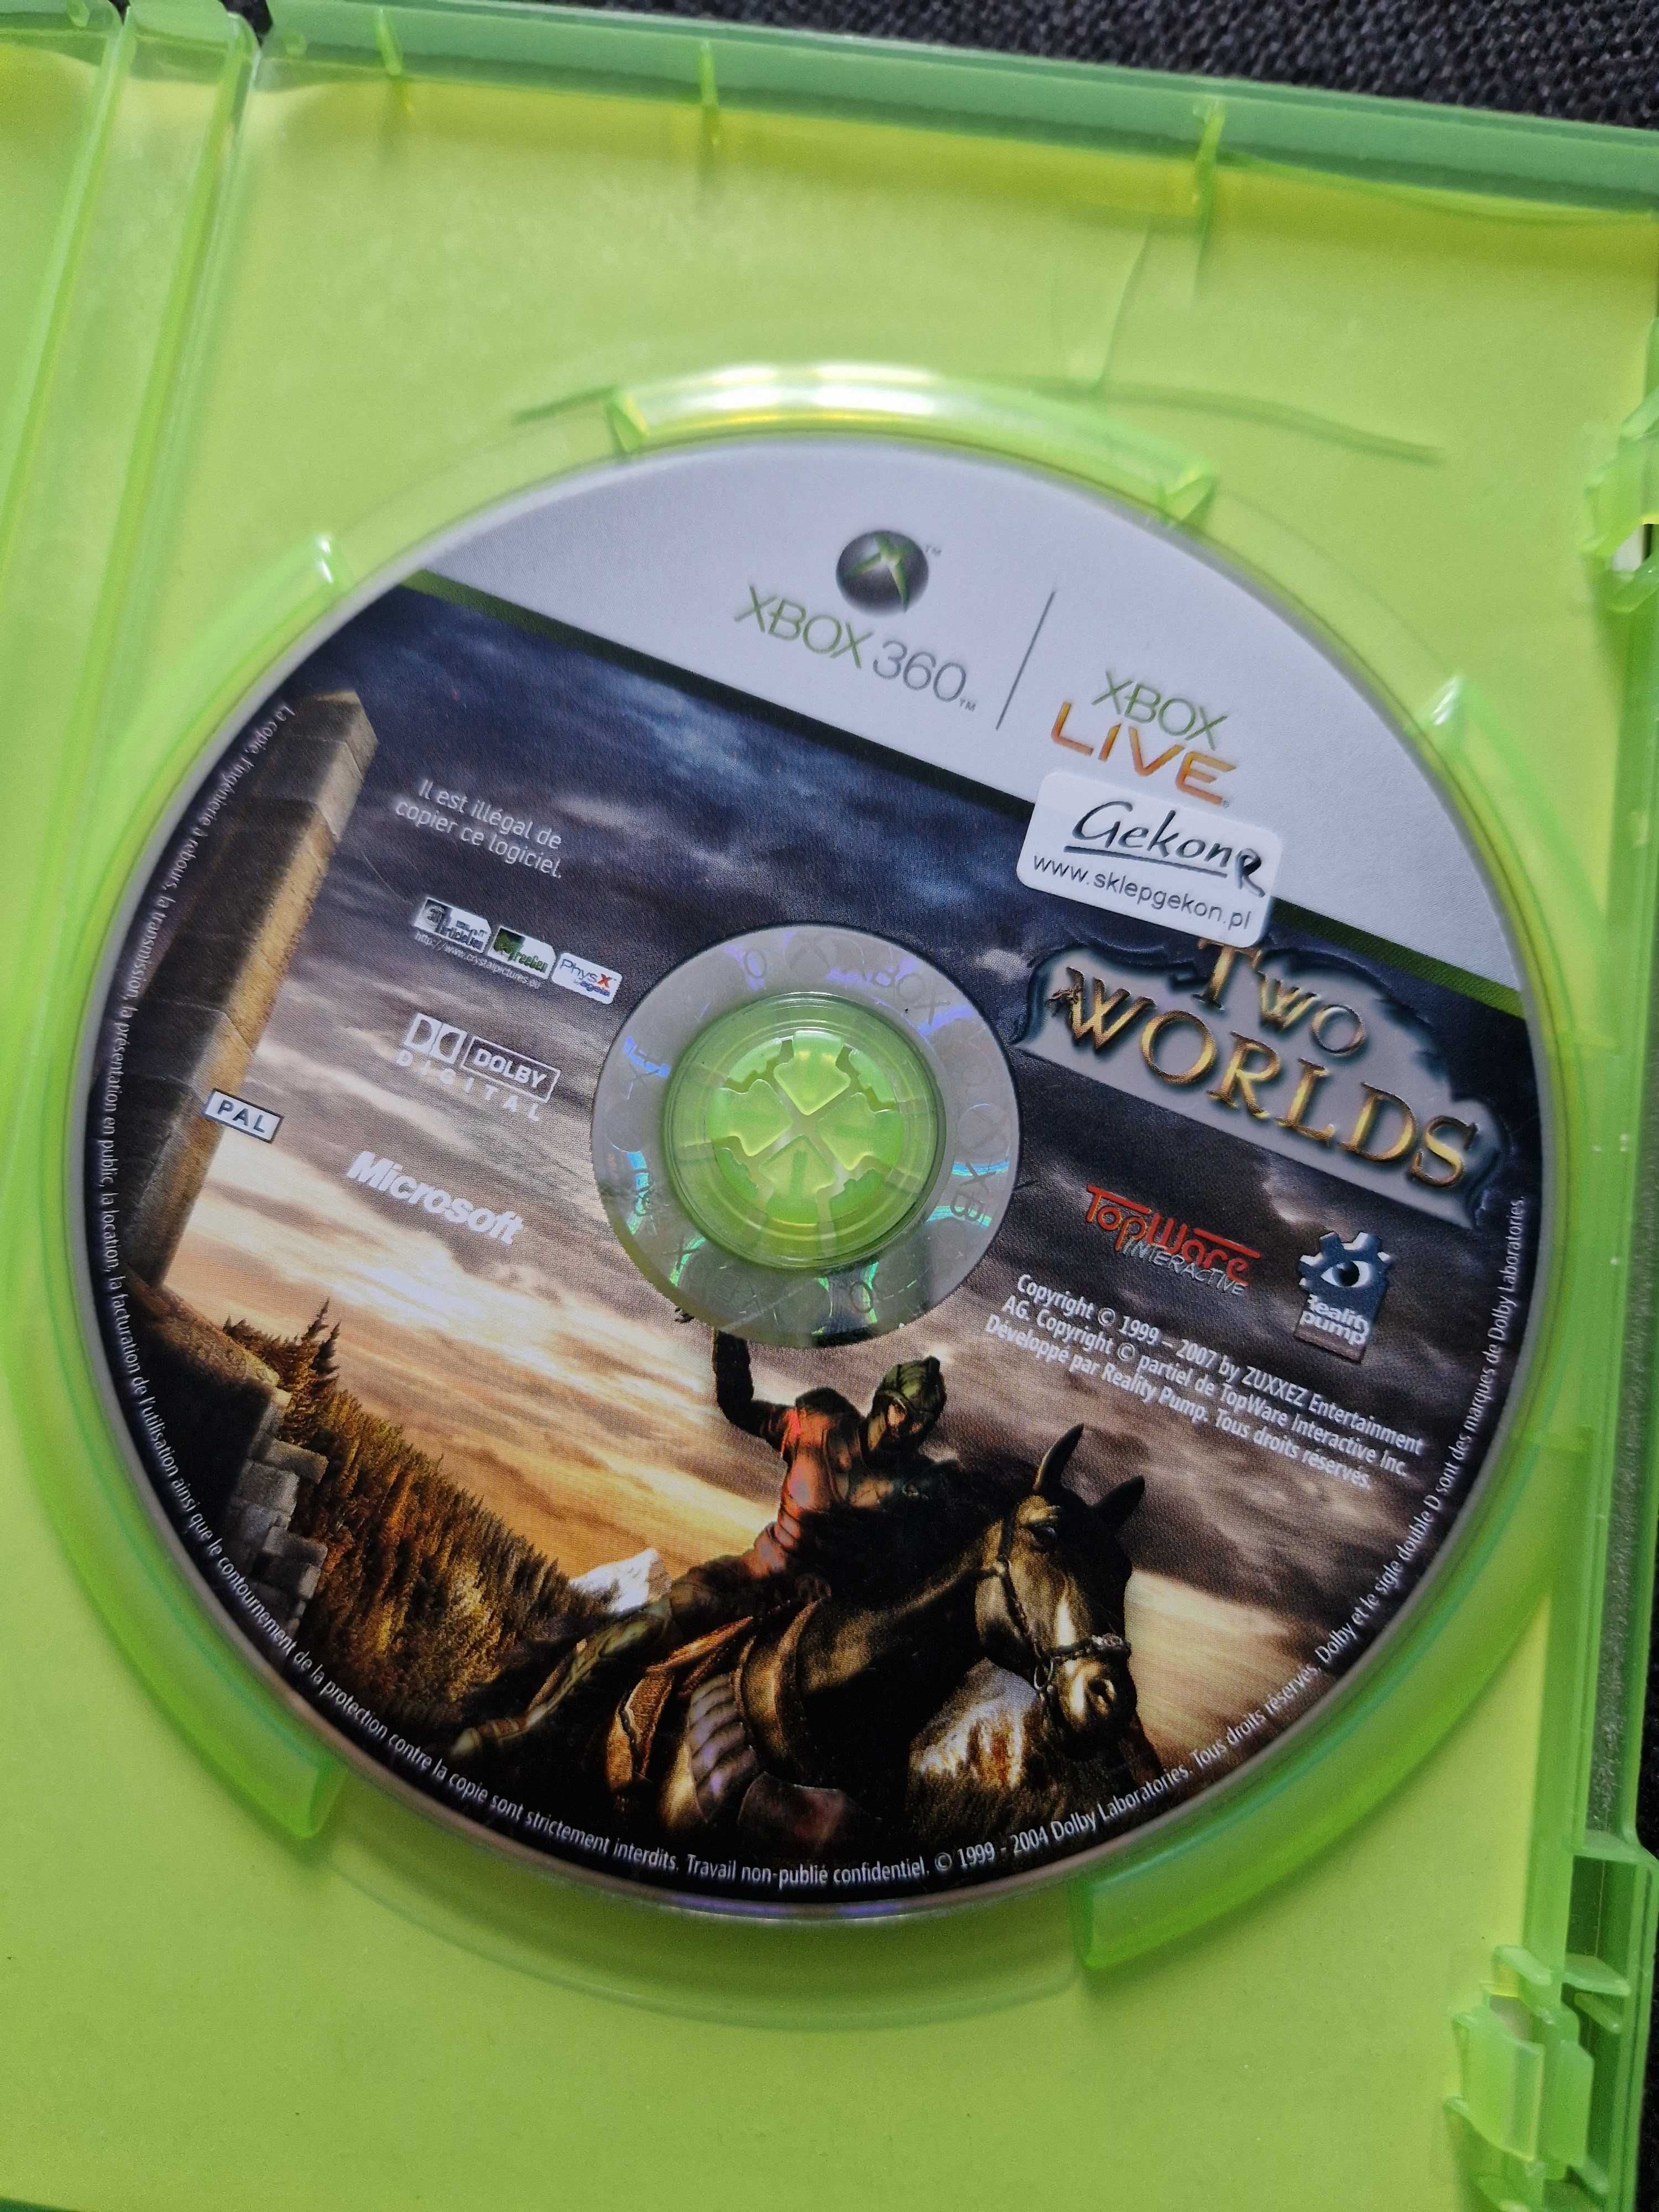 Two worlds xbox 350